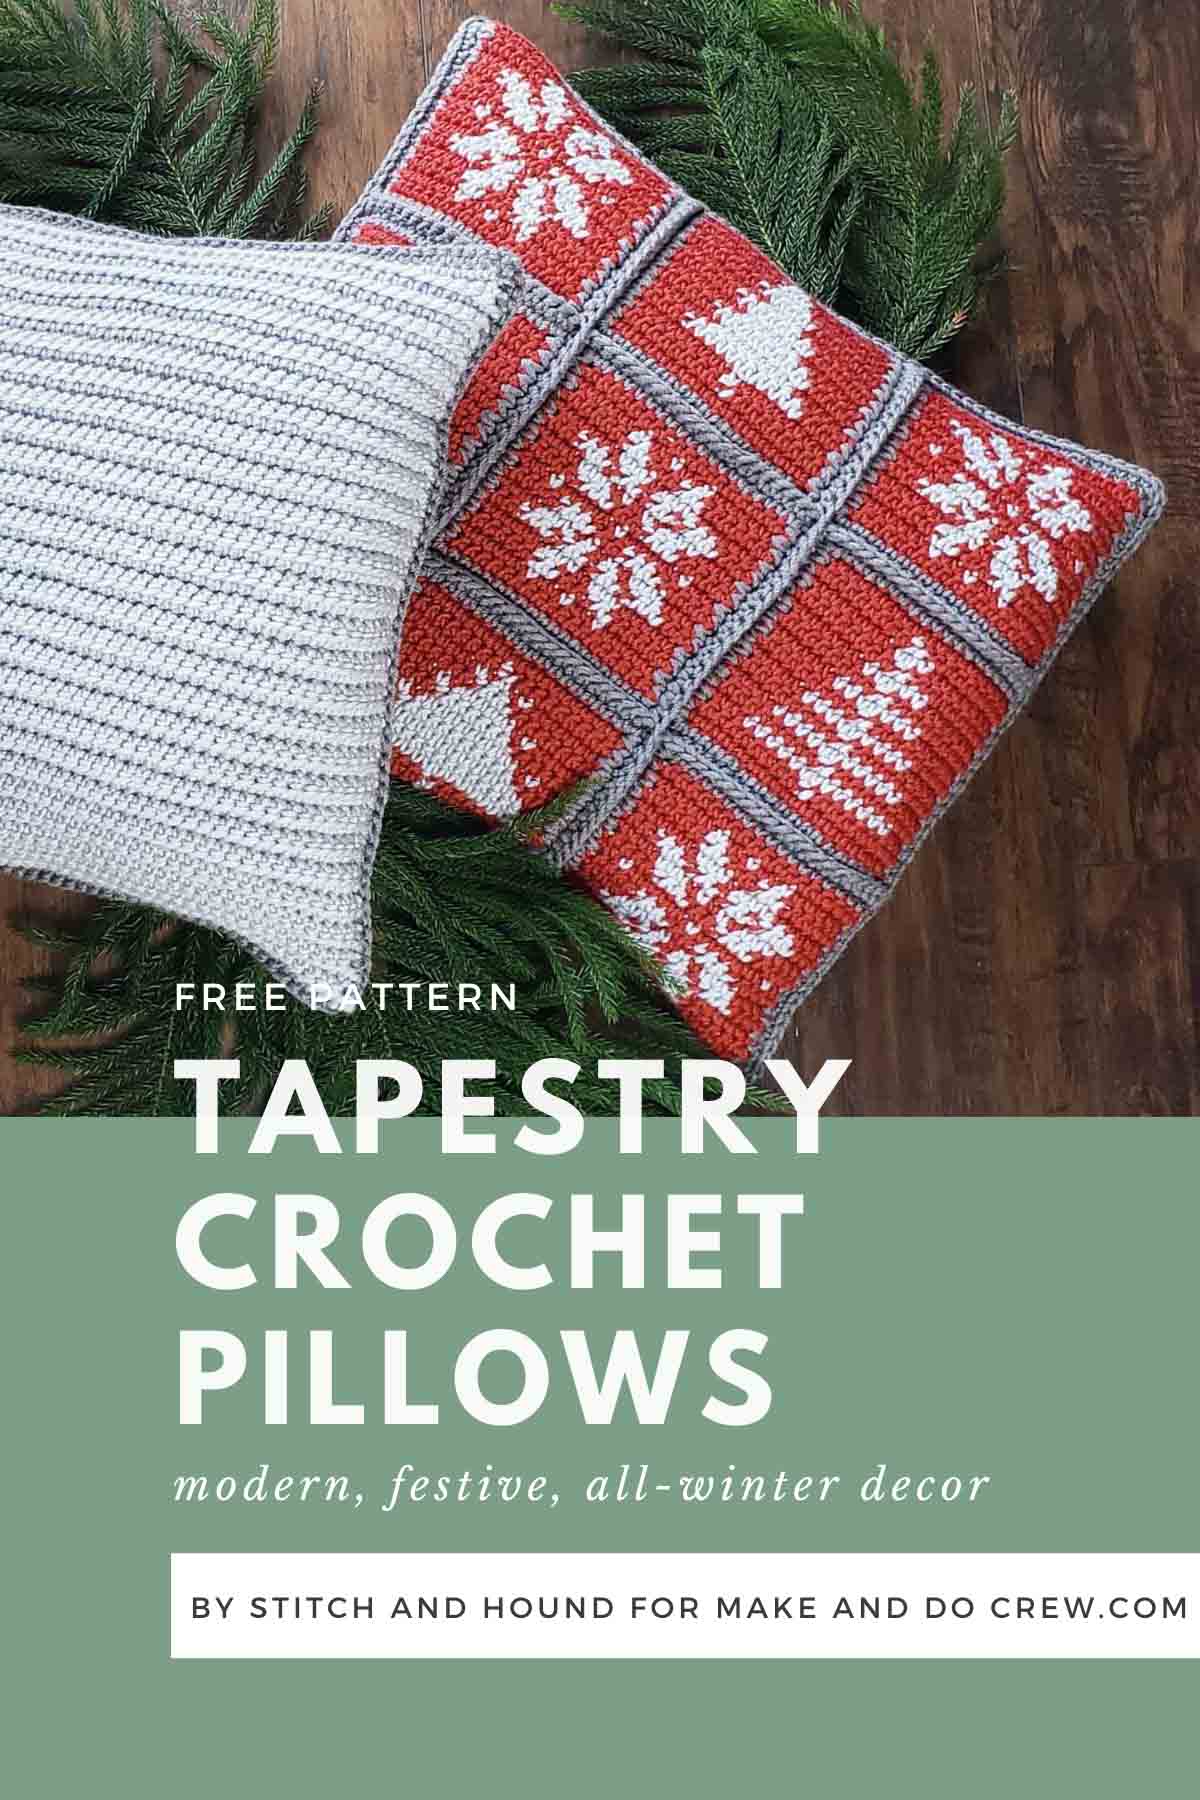 Make this Christmas tapestry crochet pattern and enjoy your Scandinavian-inspired pillows all winter long! 